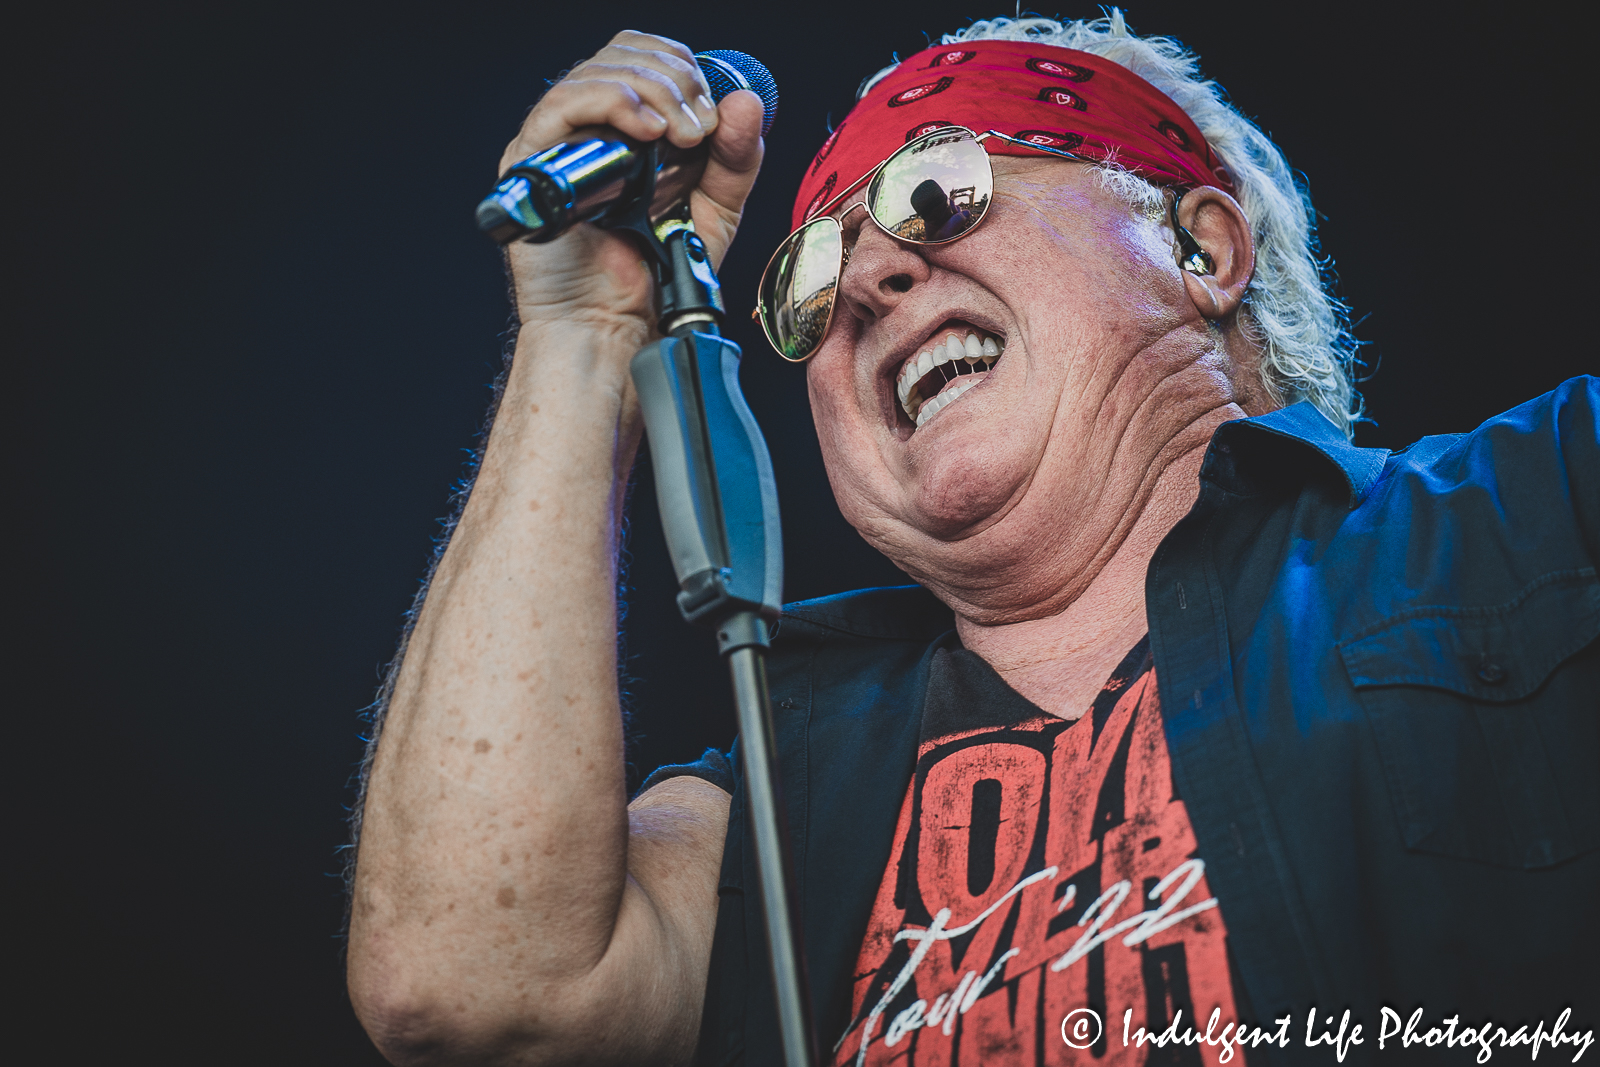 Loverboy lead singer Mike Reno singing "Queen of the Broken Hearts" live in concert at Kansas City's Starlight Theatre on July 18, 2023.